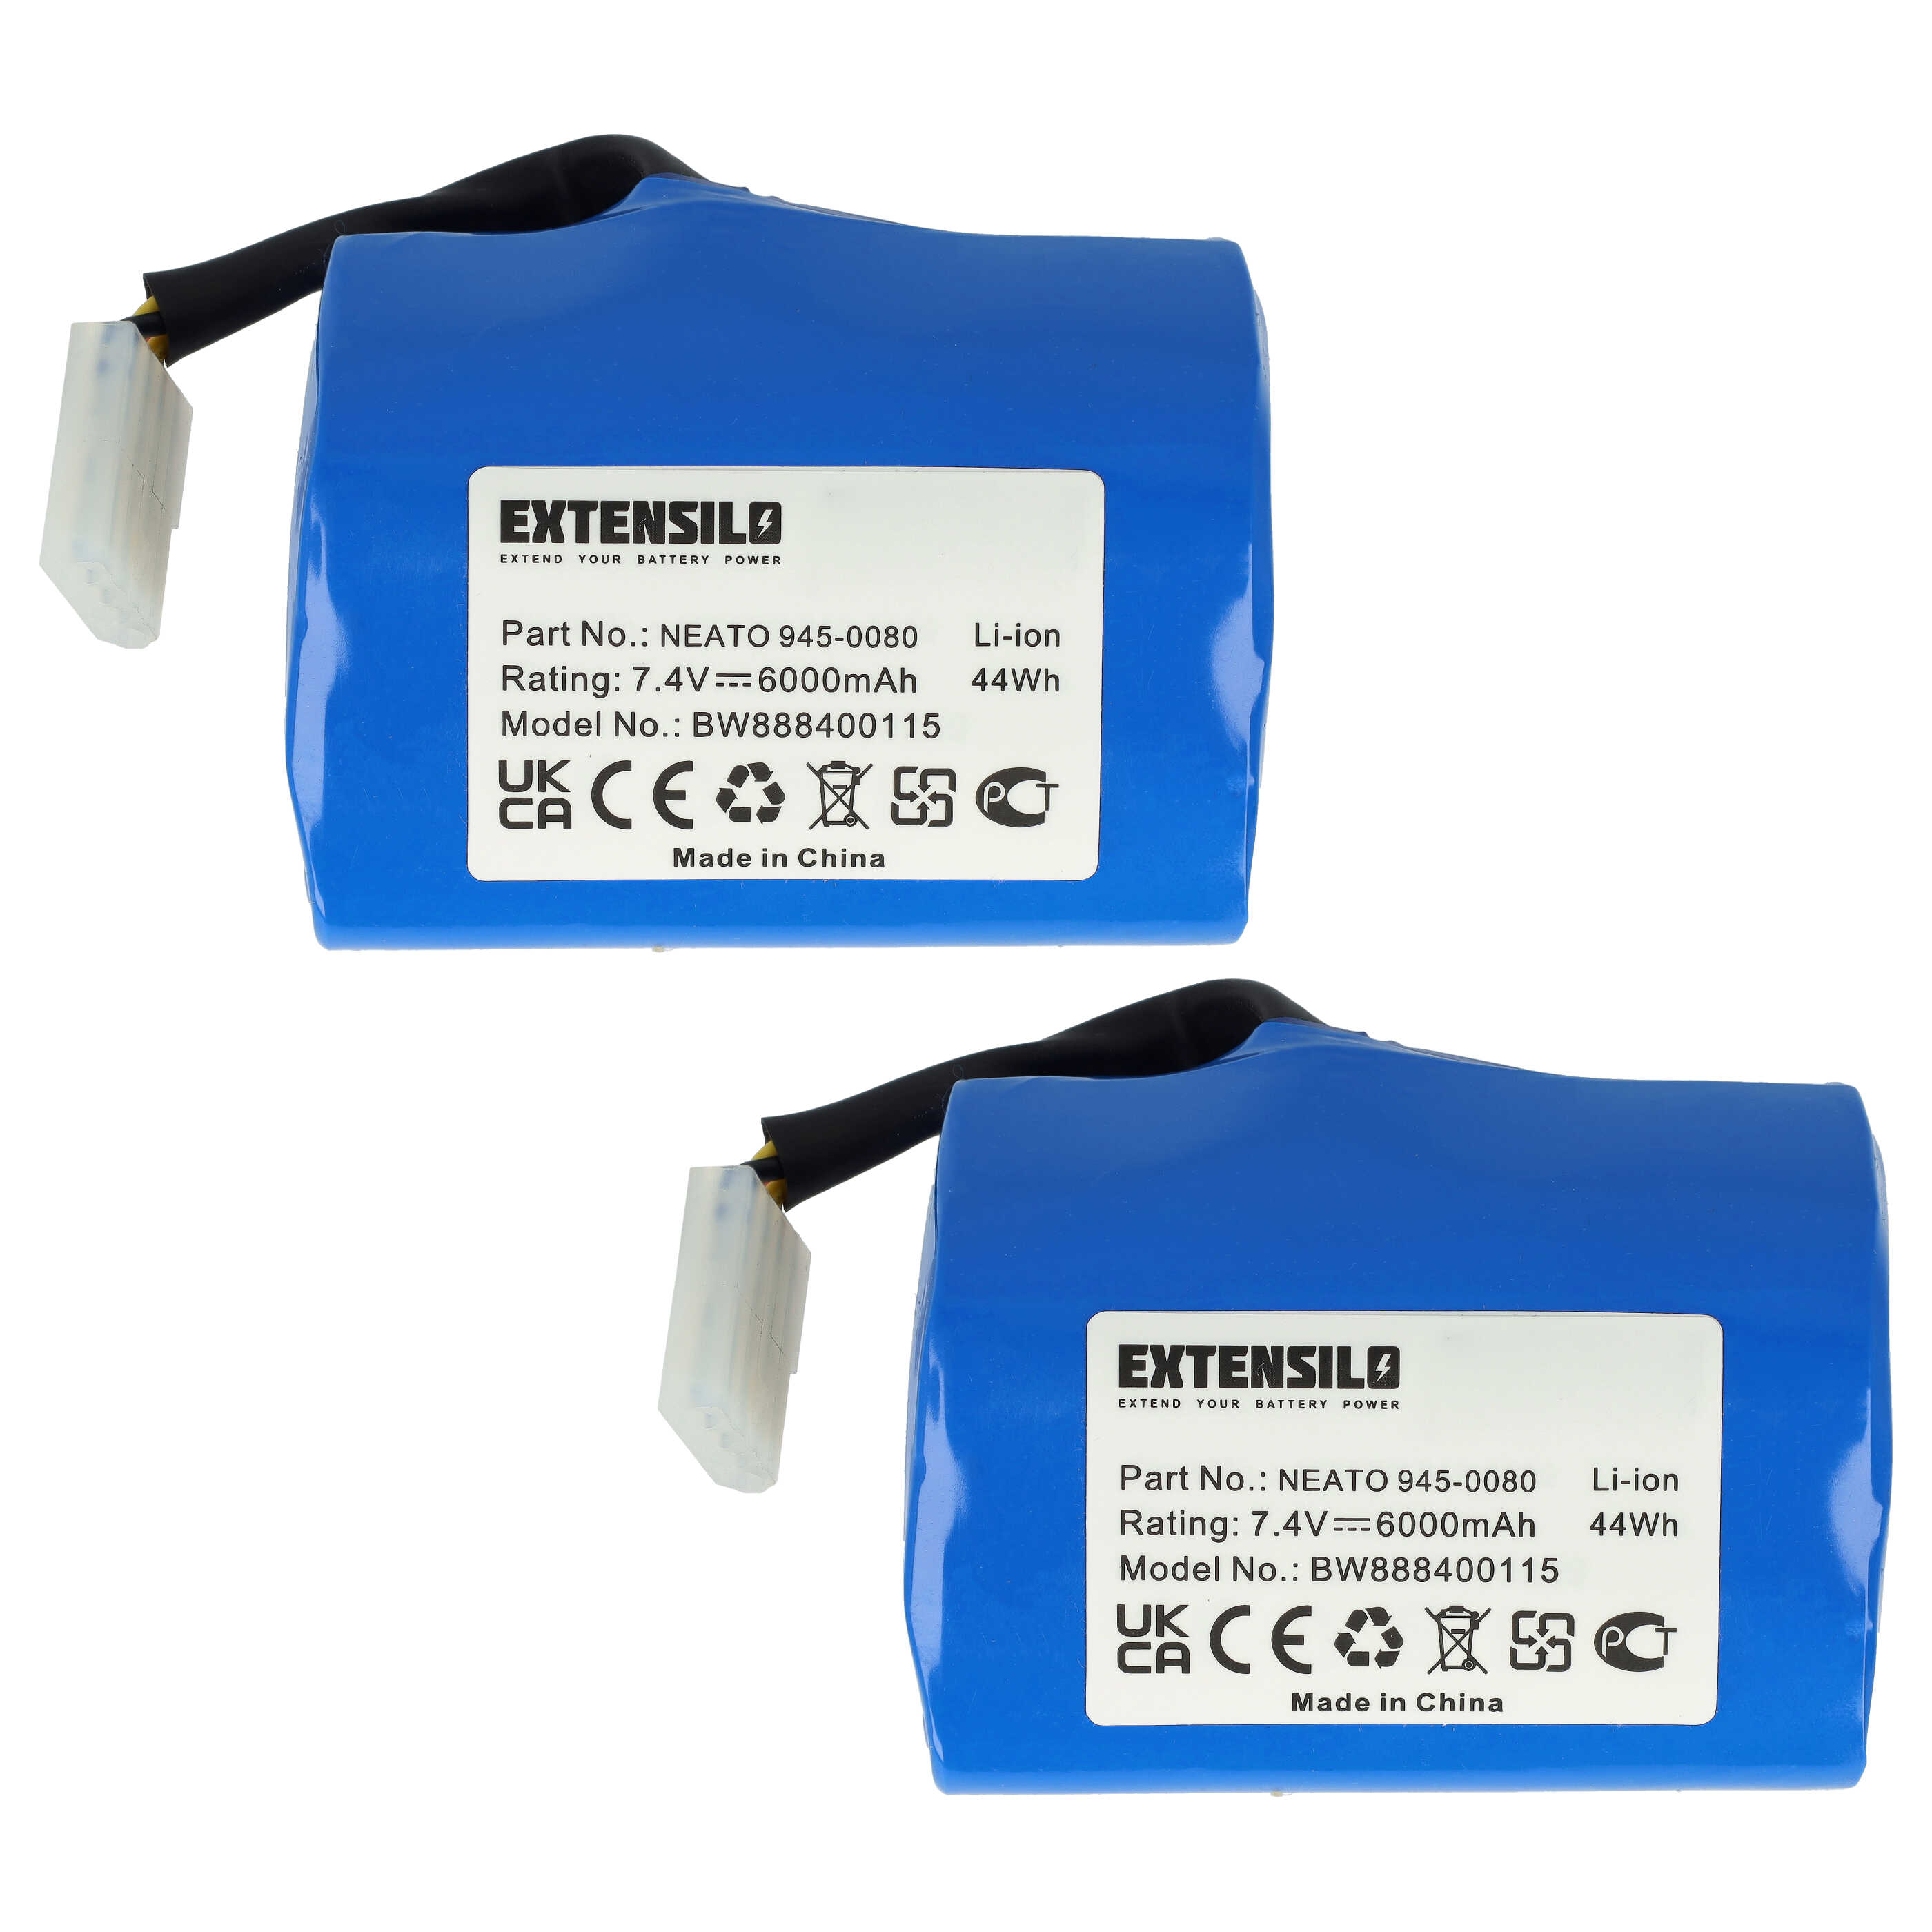 Battery (2 Units) Replacement for Neato 945-0024, 945-0006, 205-0001, 945-0005 for - 6000mAh, 7.4V, Li-Ion